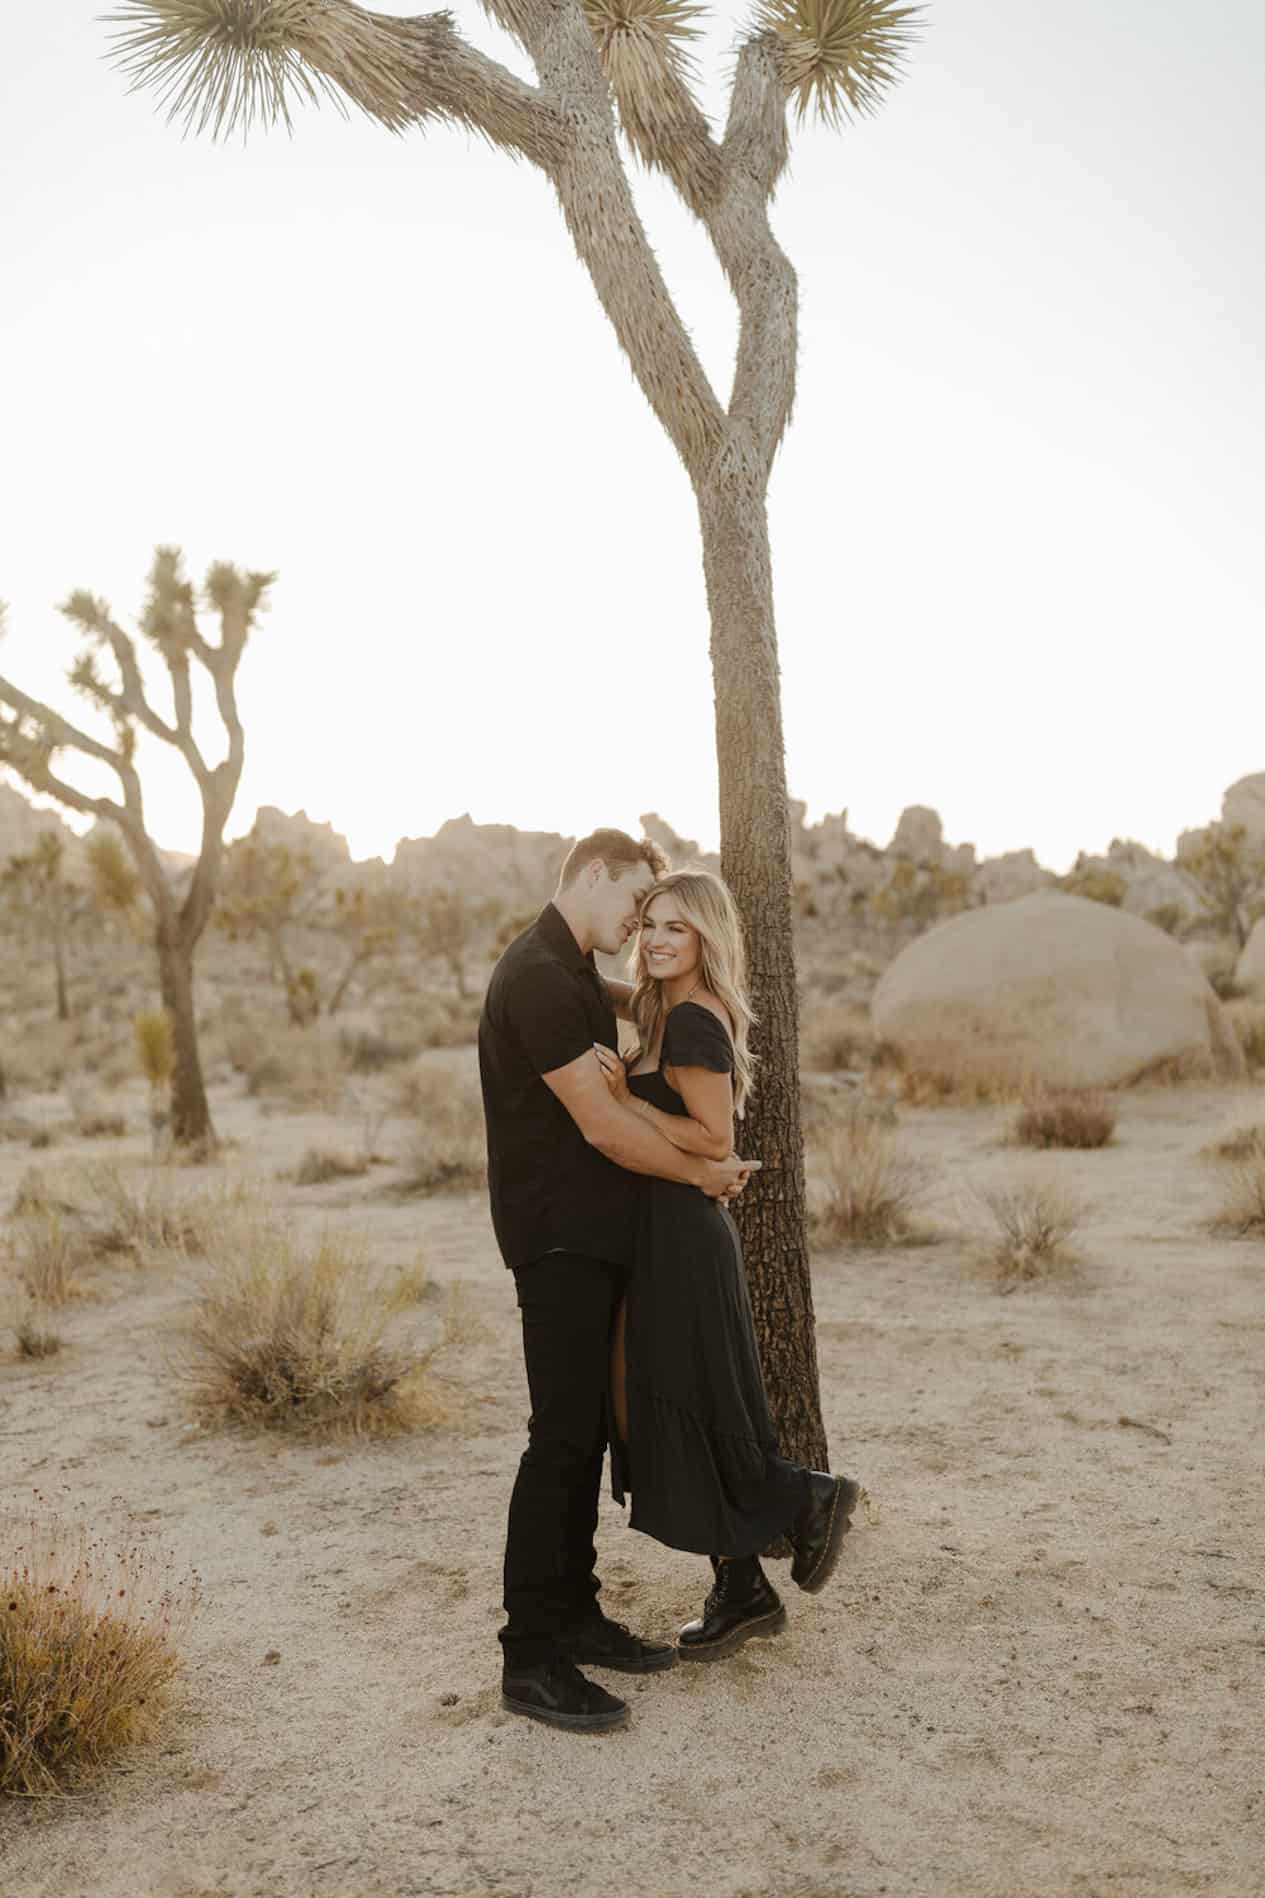 Young man and woman pose in the desert wearing all black.